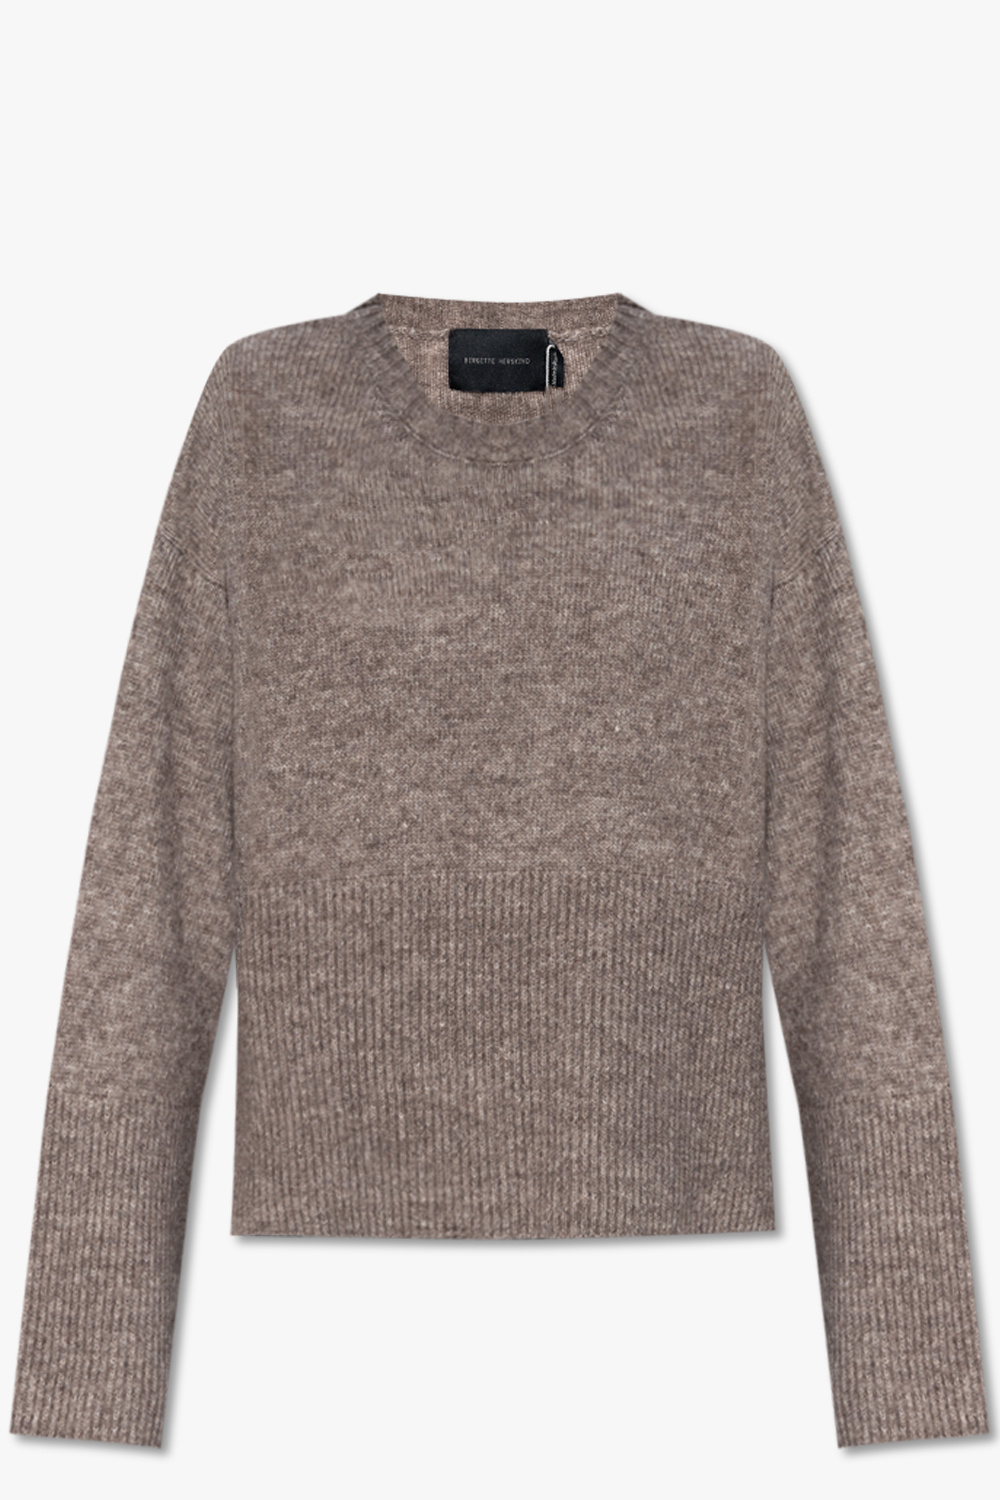 Birgitte Herskind ‘Andres’ sweater Curve with vents